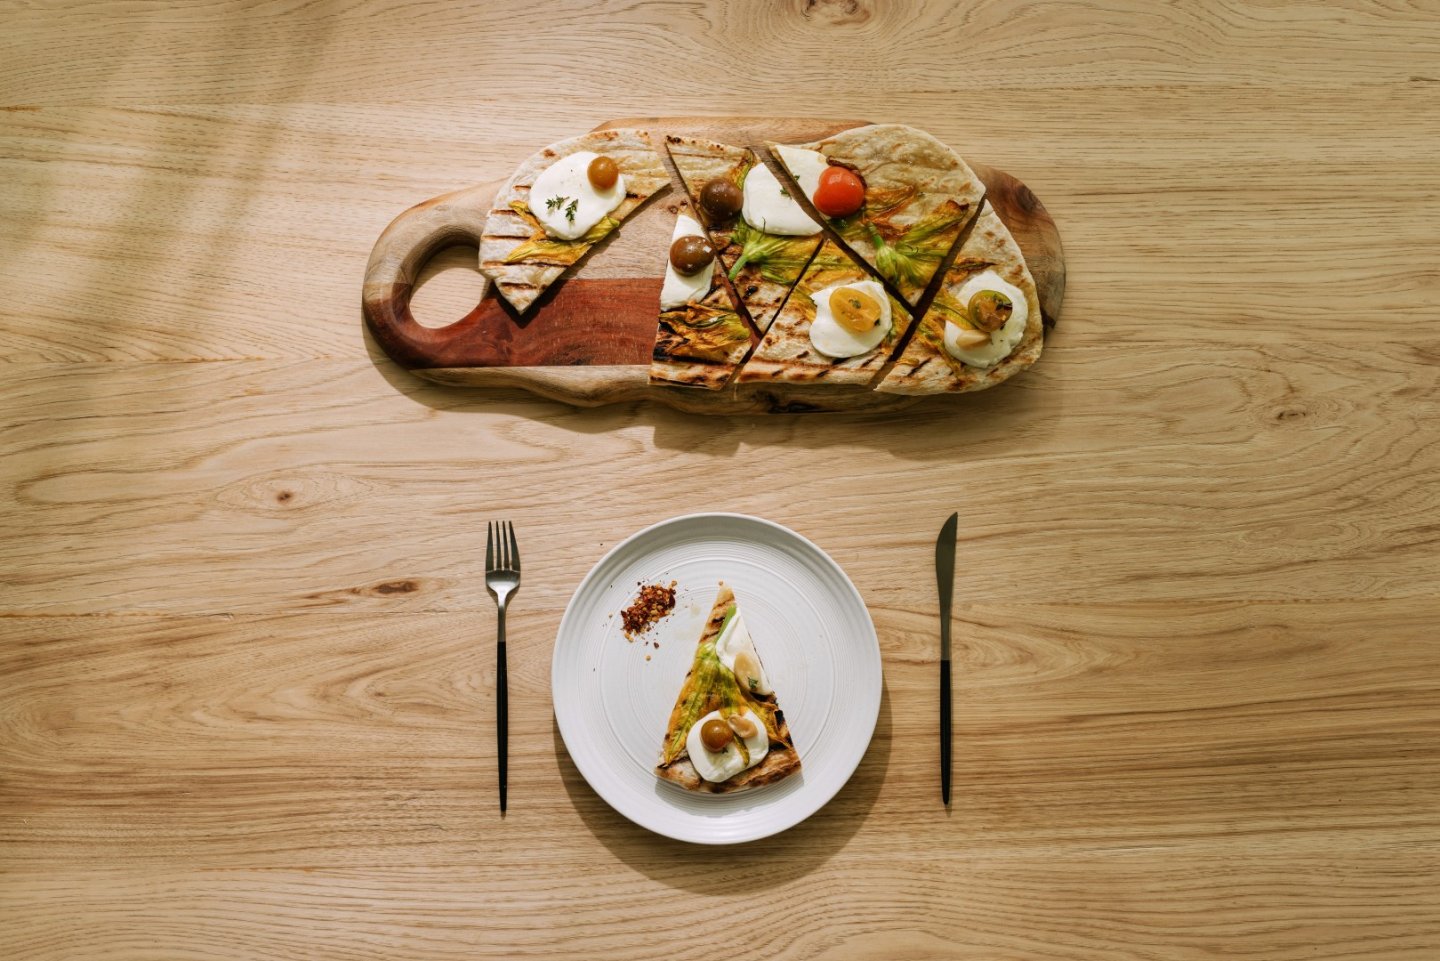 a plate of food on a wooden table.